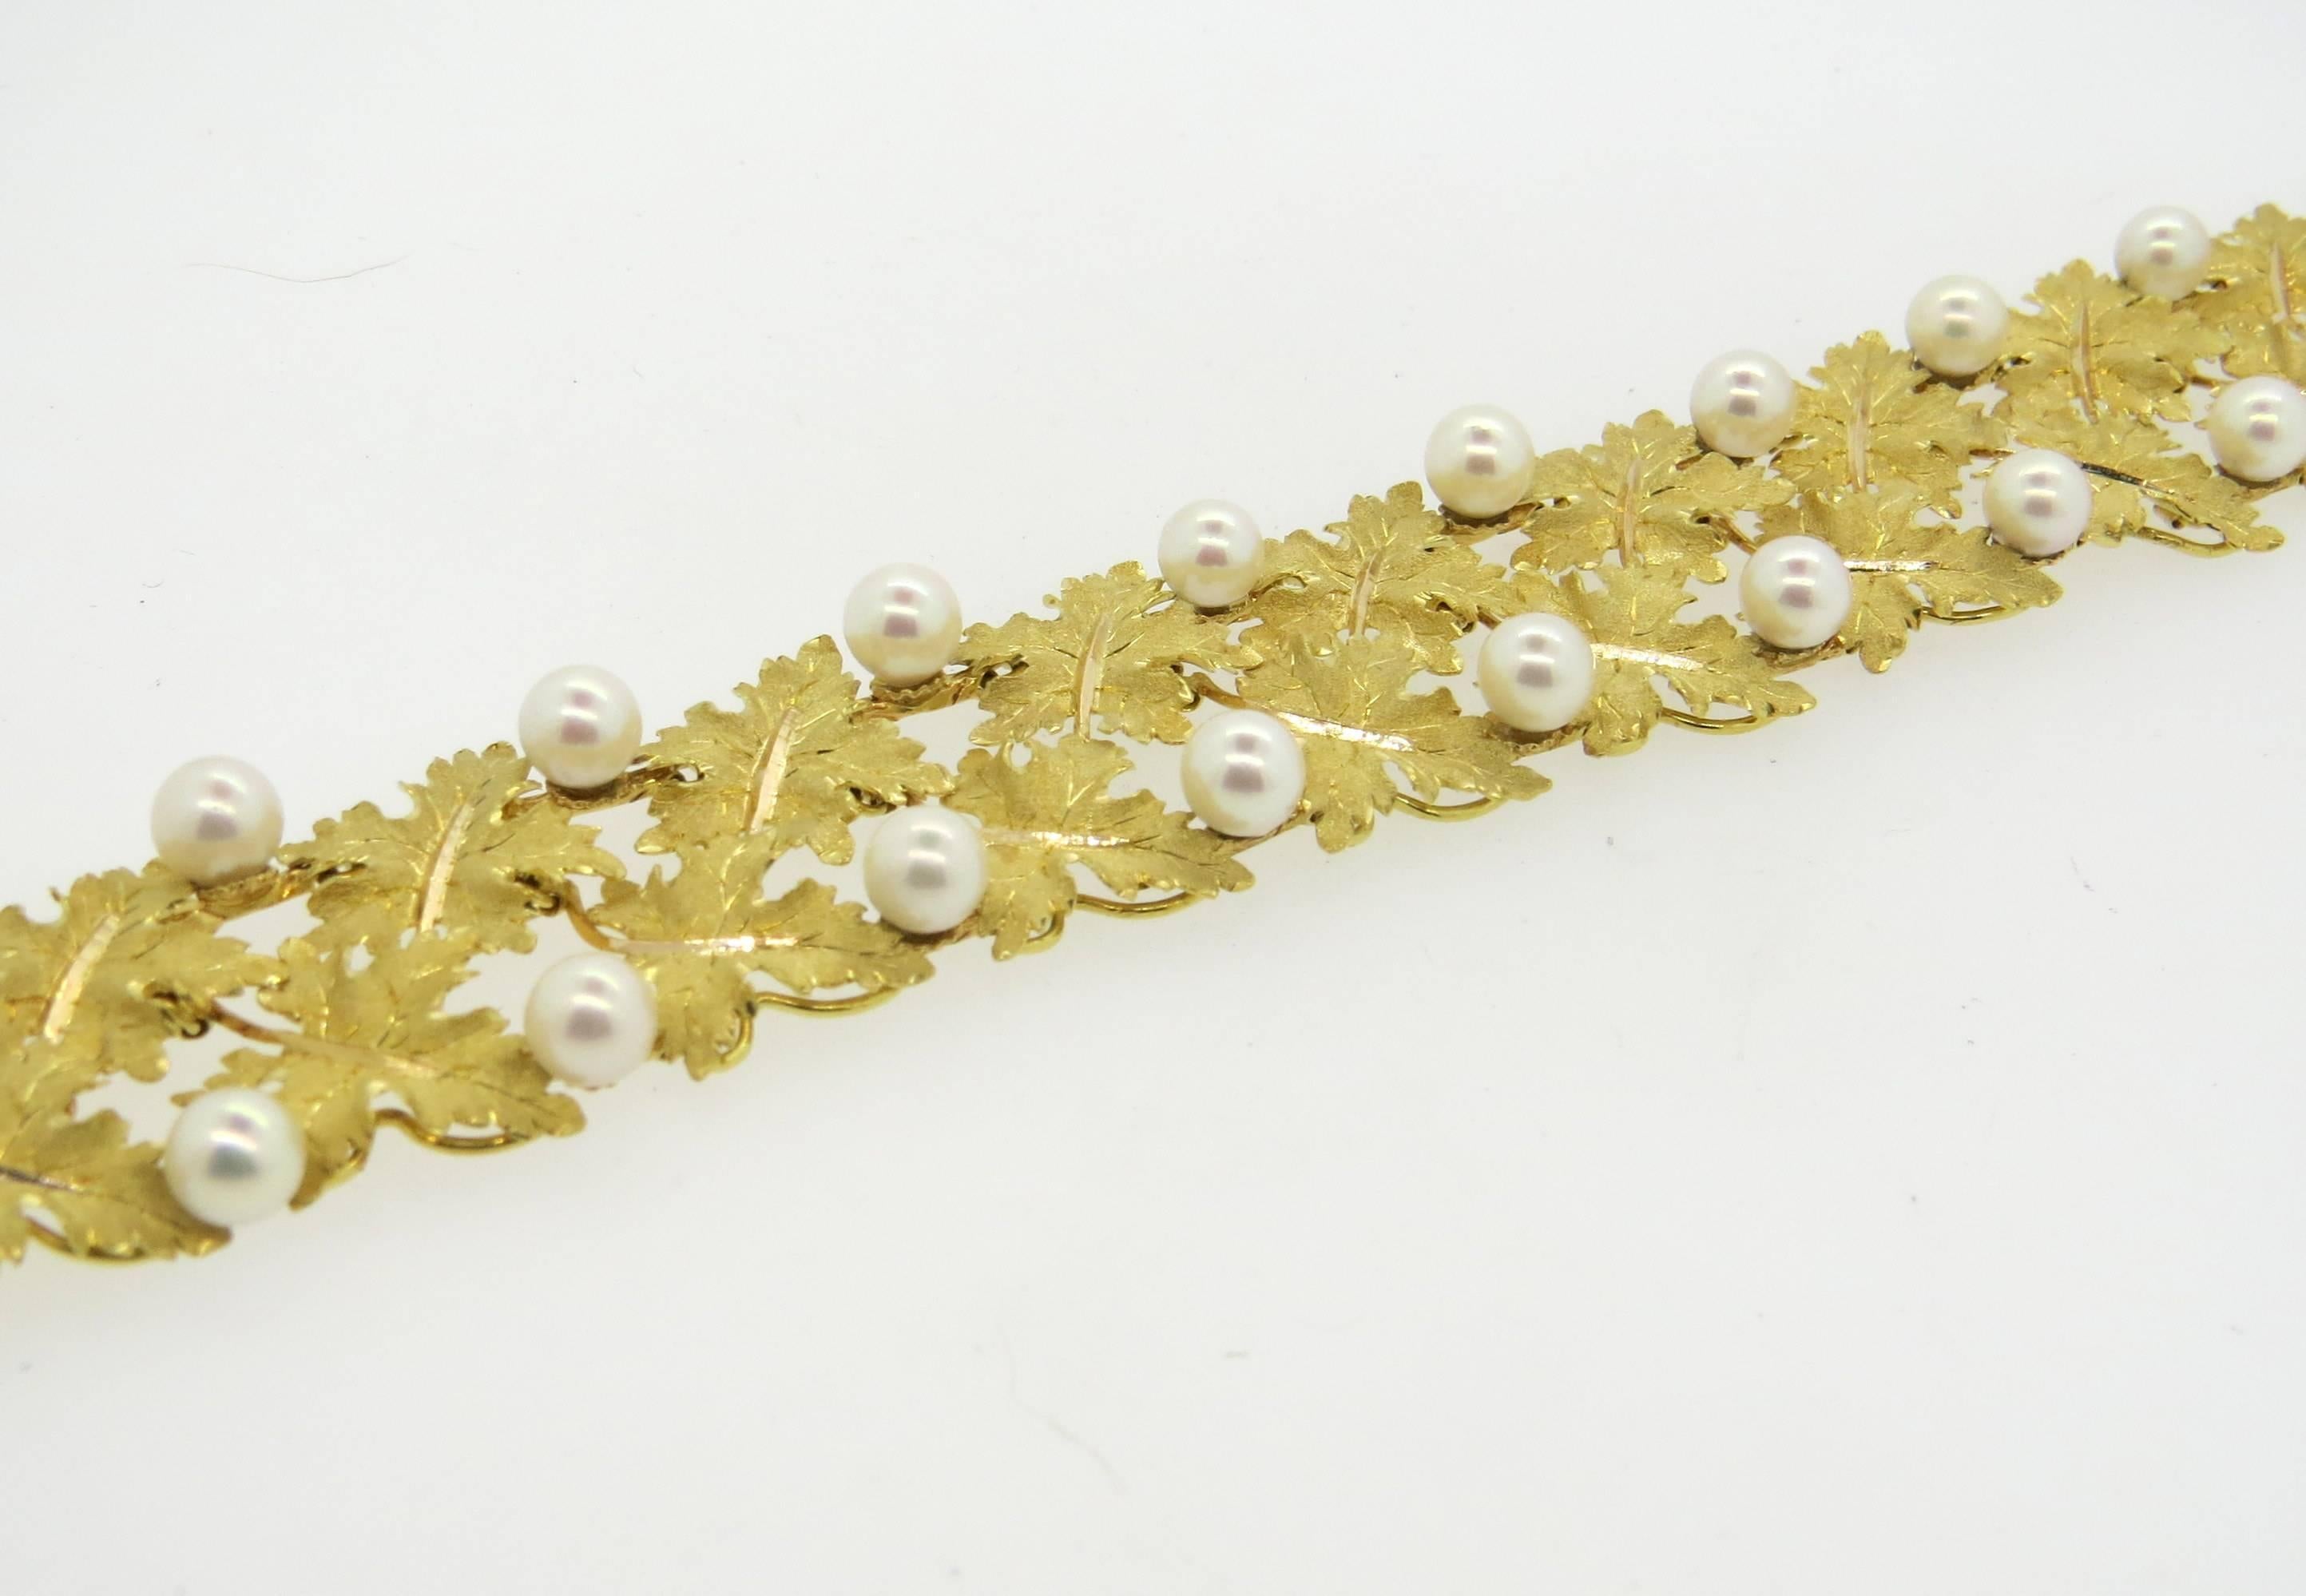 18k yellow gold bracelet, crafted by Buccellati, featuring leaves and 6.5mm pearls. Bracelet is 7 3/8